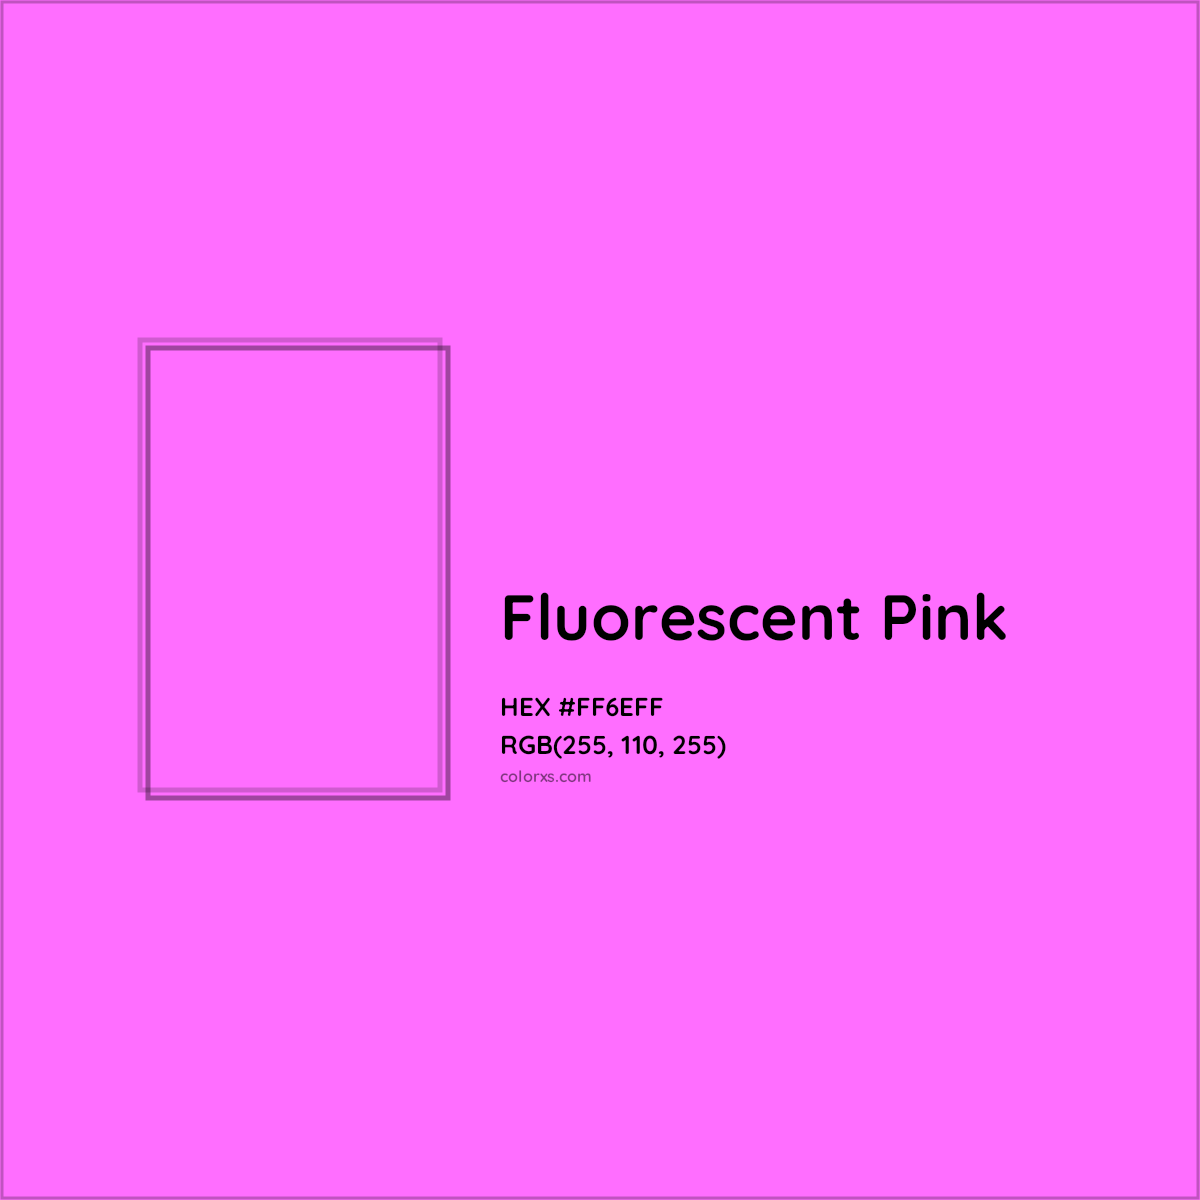 About Fluorescent Pink - Color meaning, codes, similar colors and ...